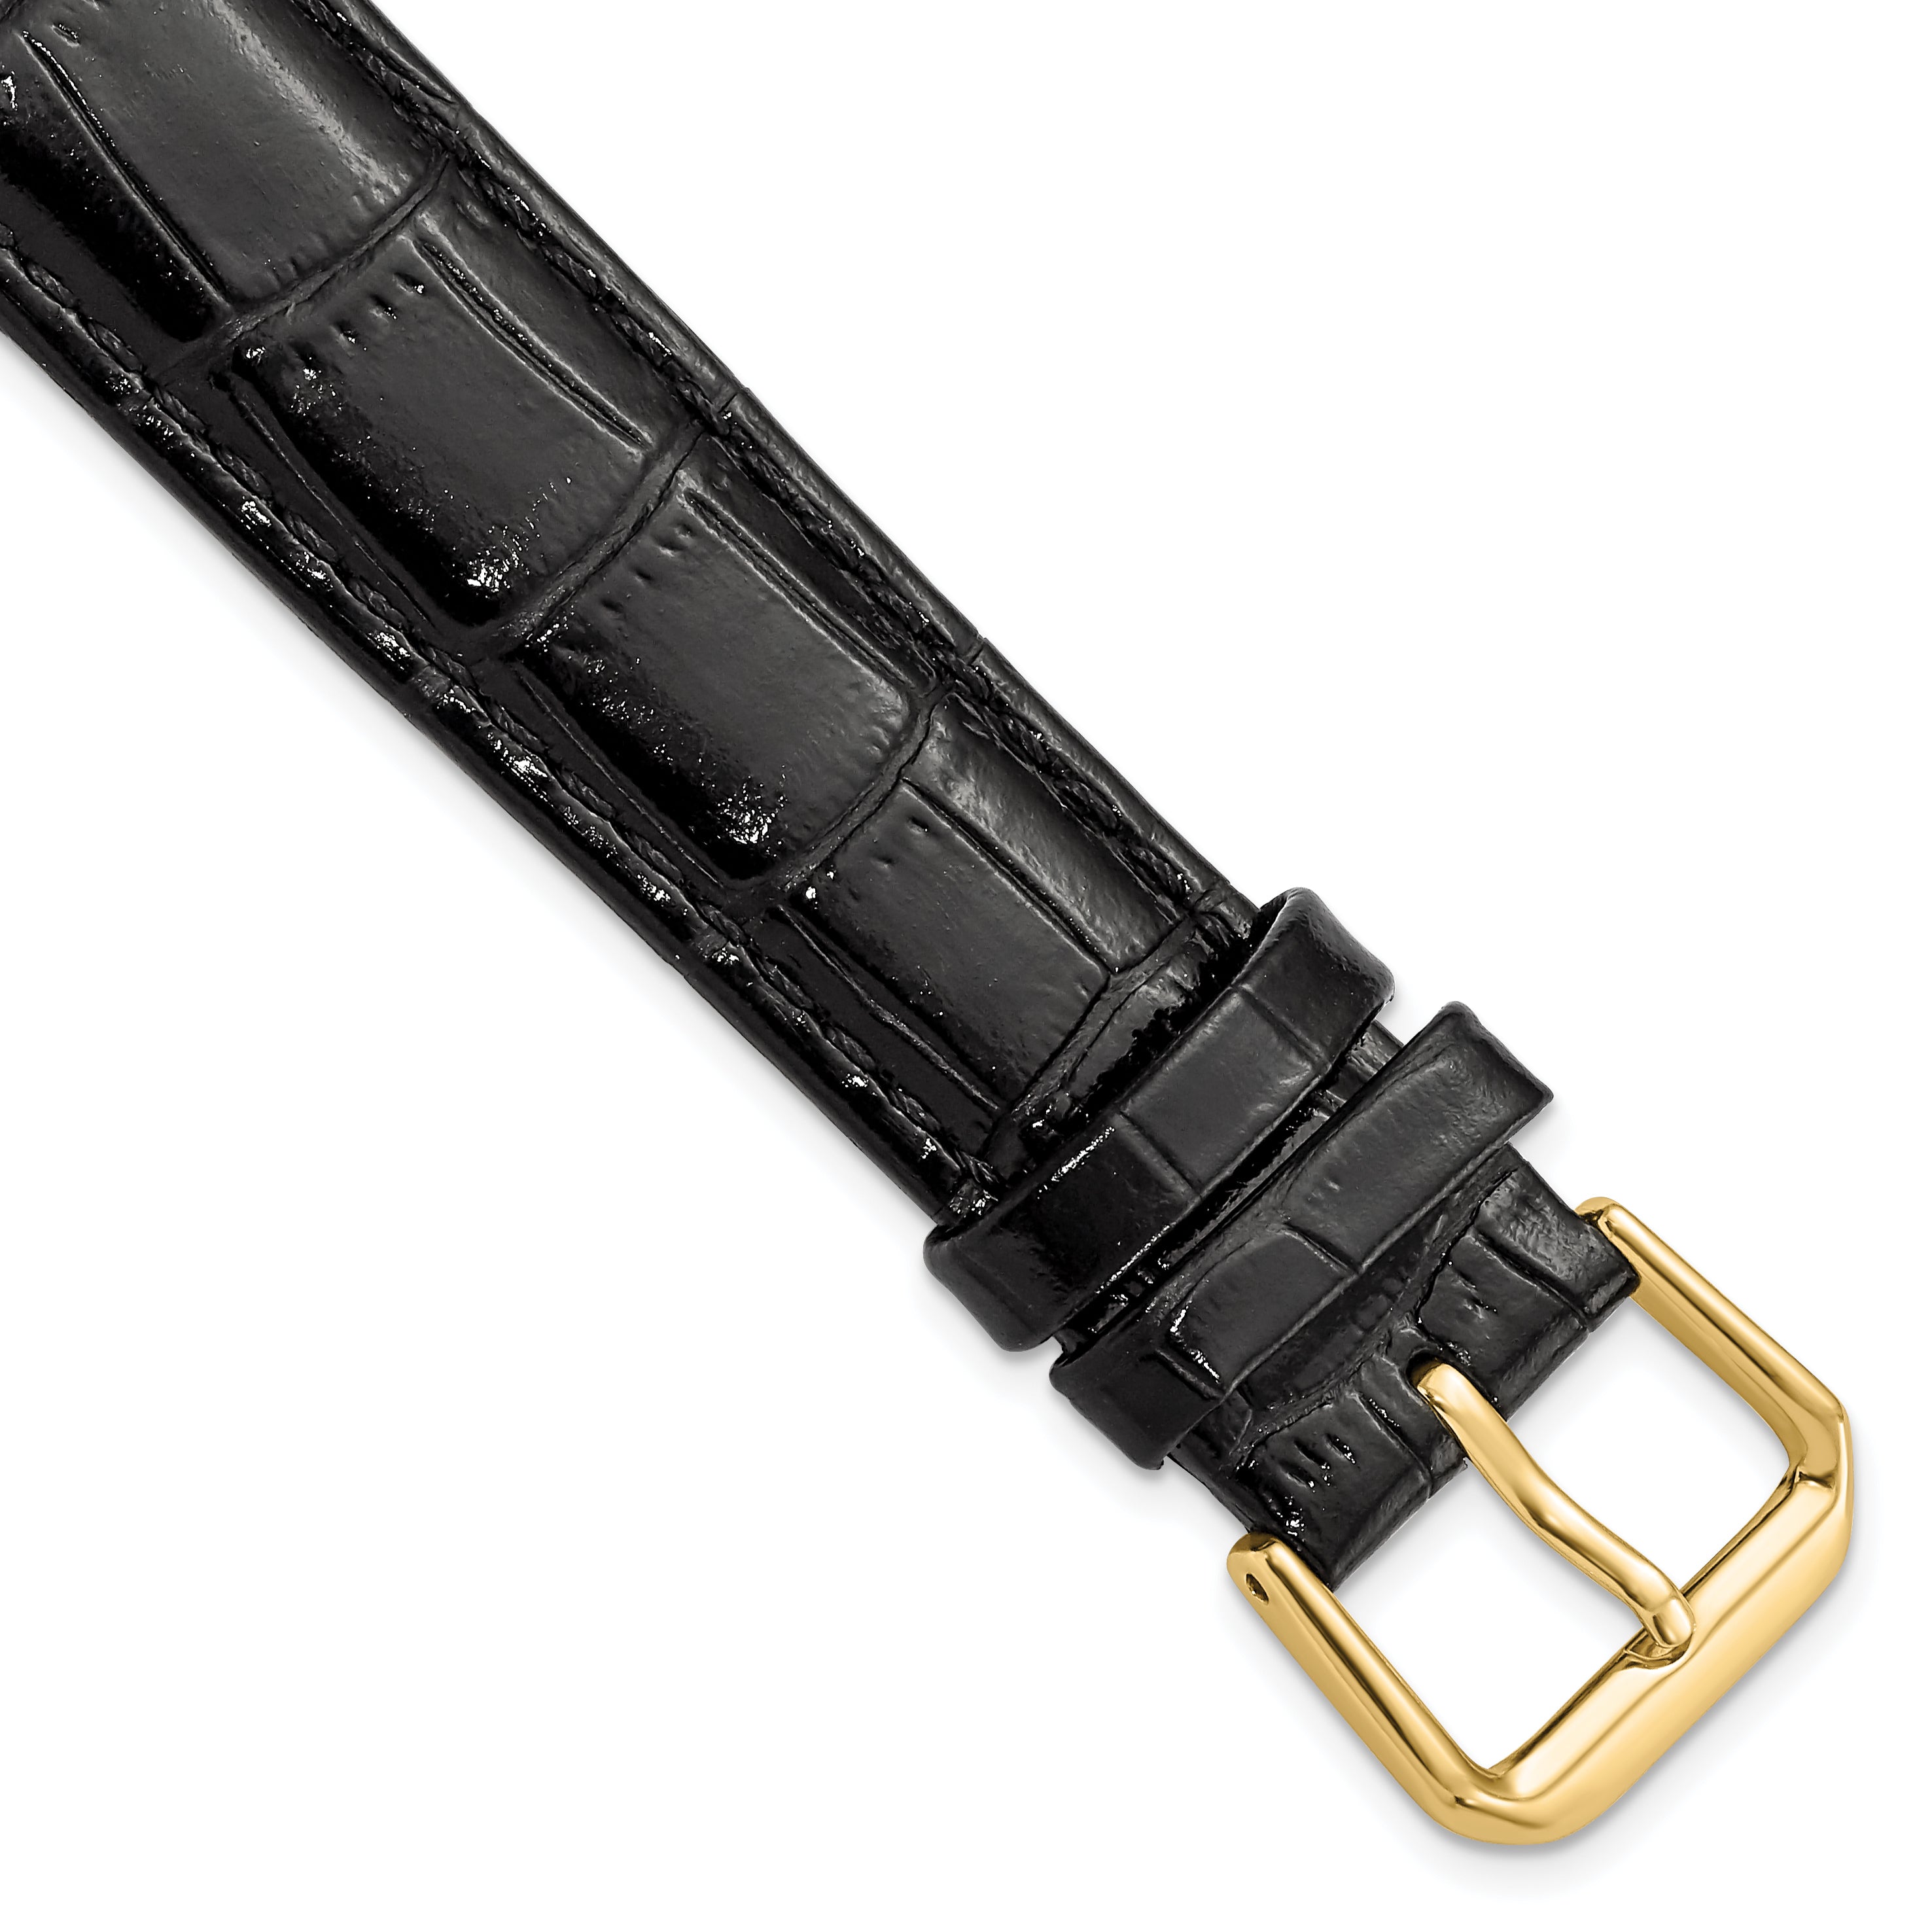 DeBeer 18mm Black Crocodile Grain Leather with Dark Stitching and Gold-tone Buckle 7.5 inch Watch Band